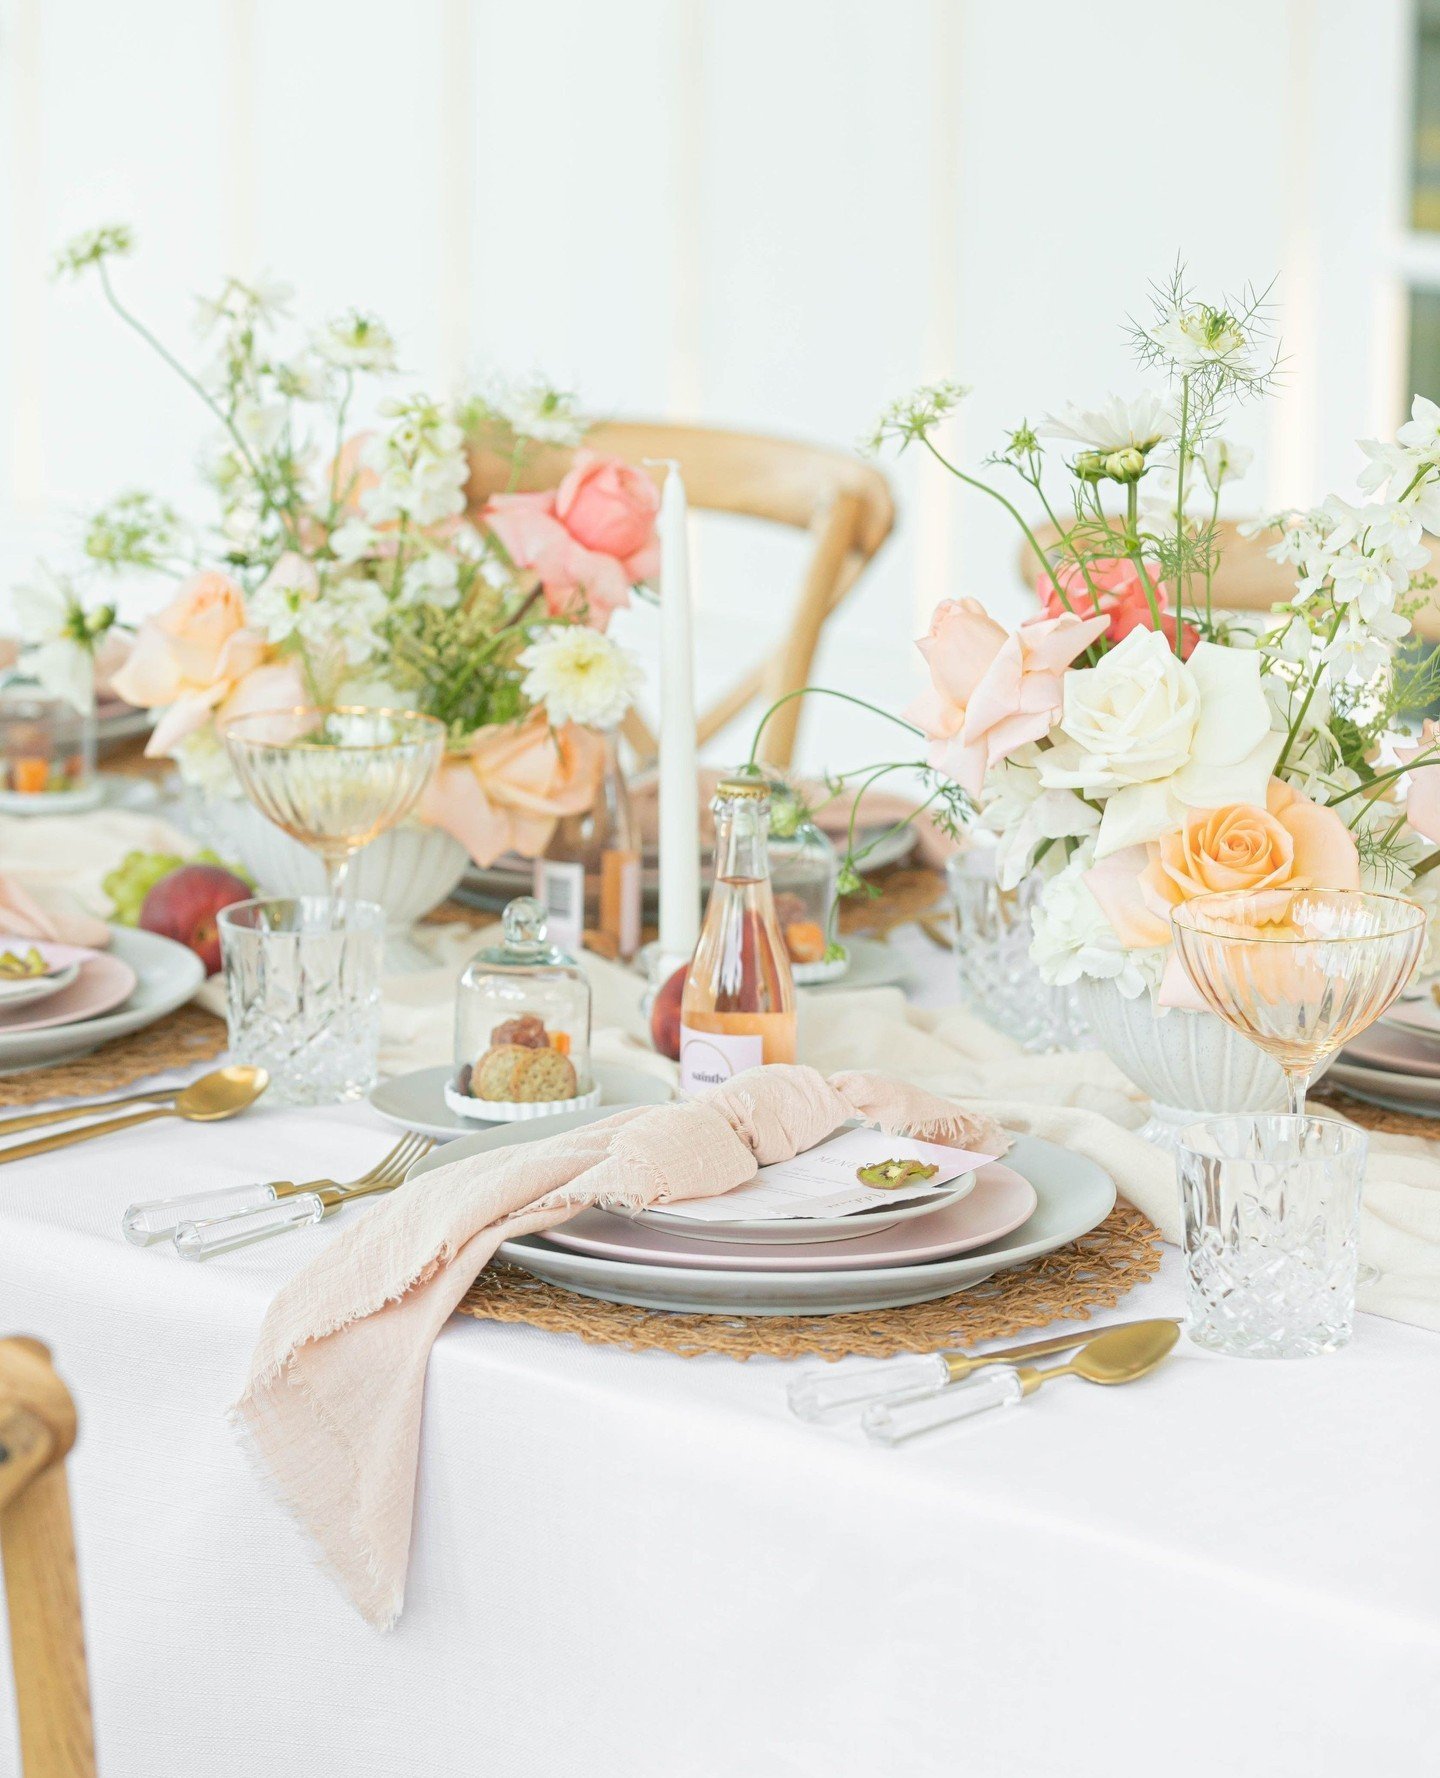 Some pretty from our shoot that was published in @rockymtnbride. ⁠
⁠
It's all in the details - mini champagne for each guest, mini charcuterie, and plenty of conversation starter details. What do you see that you love in this table setting? ⁠
⁠
@hatt